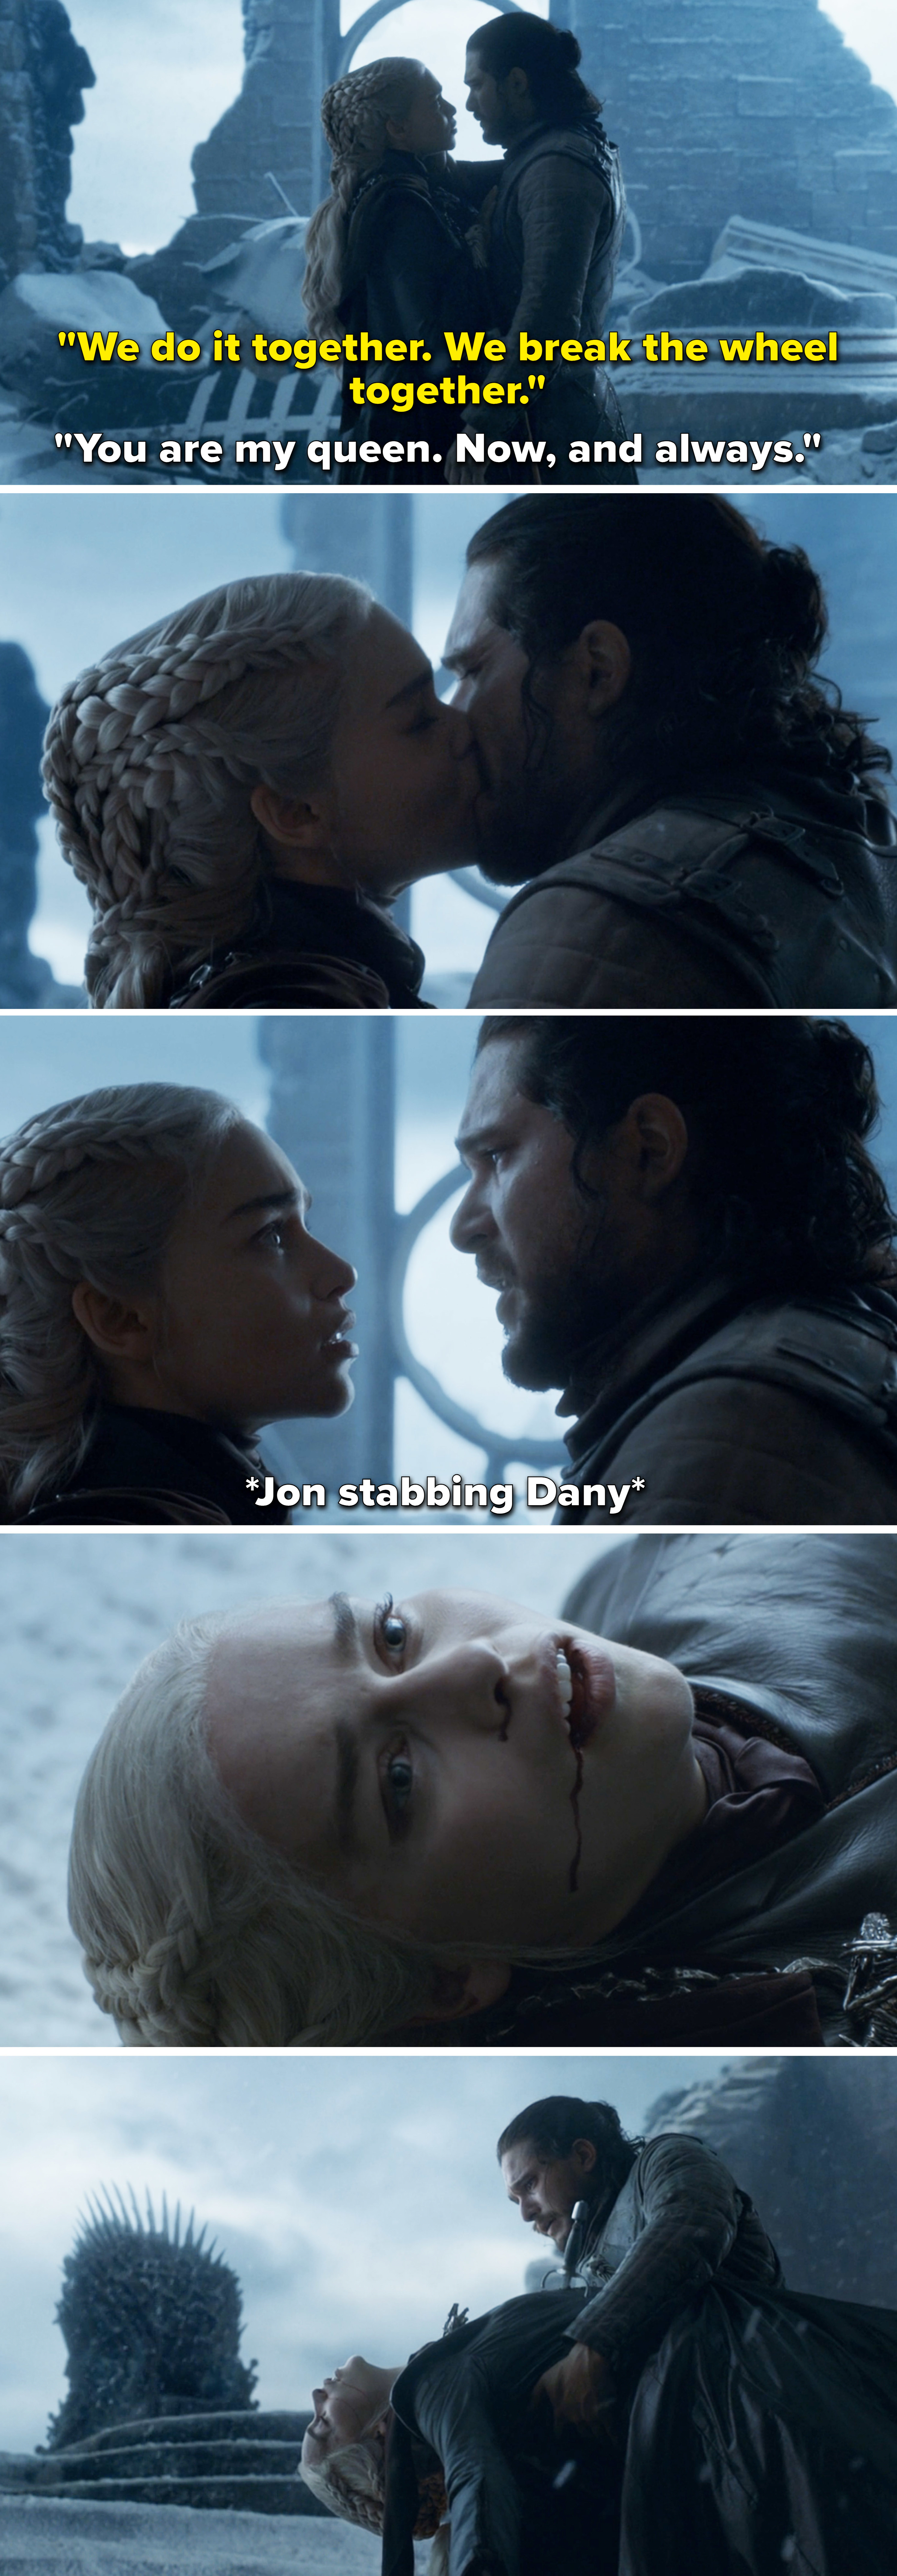 Jon snow kisses her and then stabs her